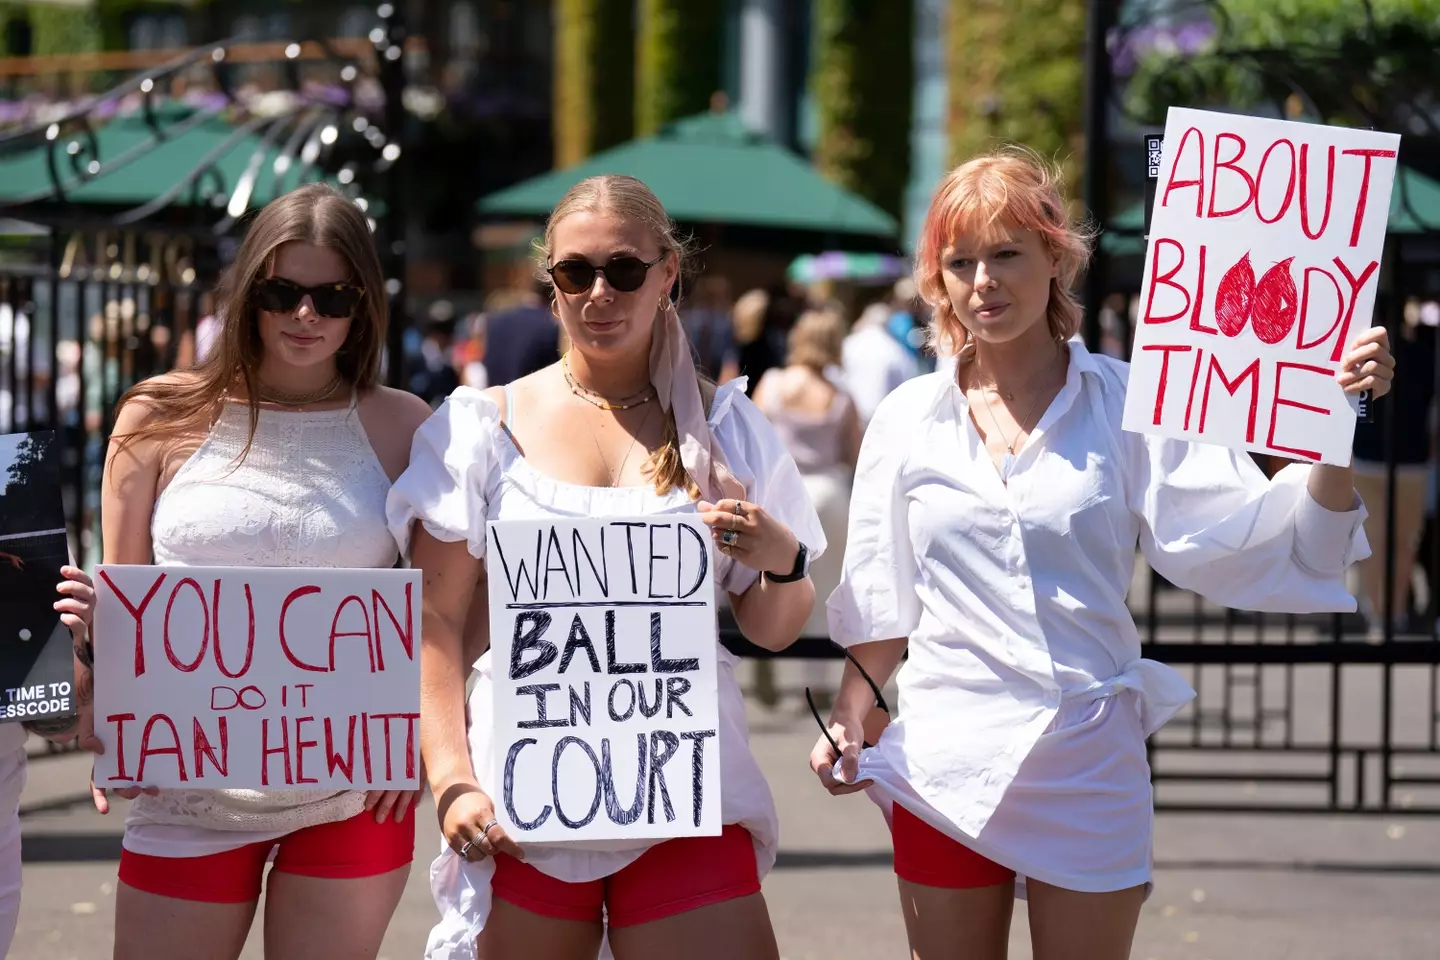 Protests took place over the all-white clothing rule.